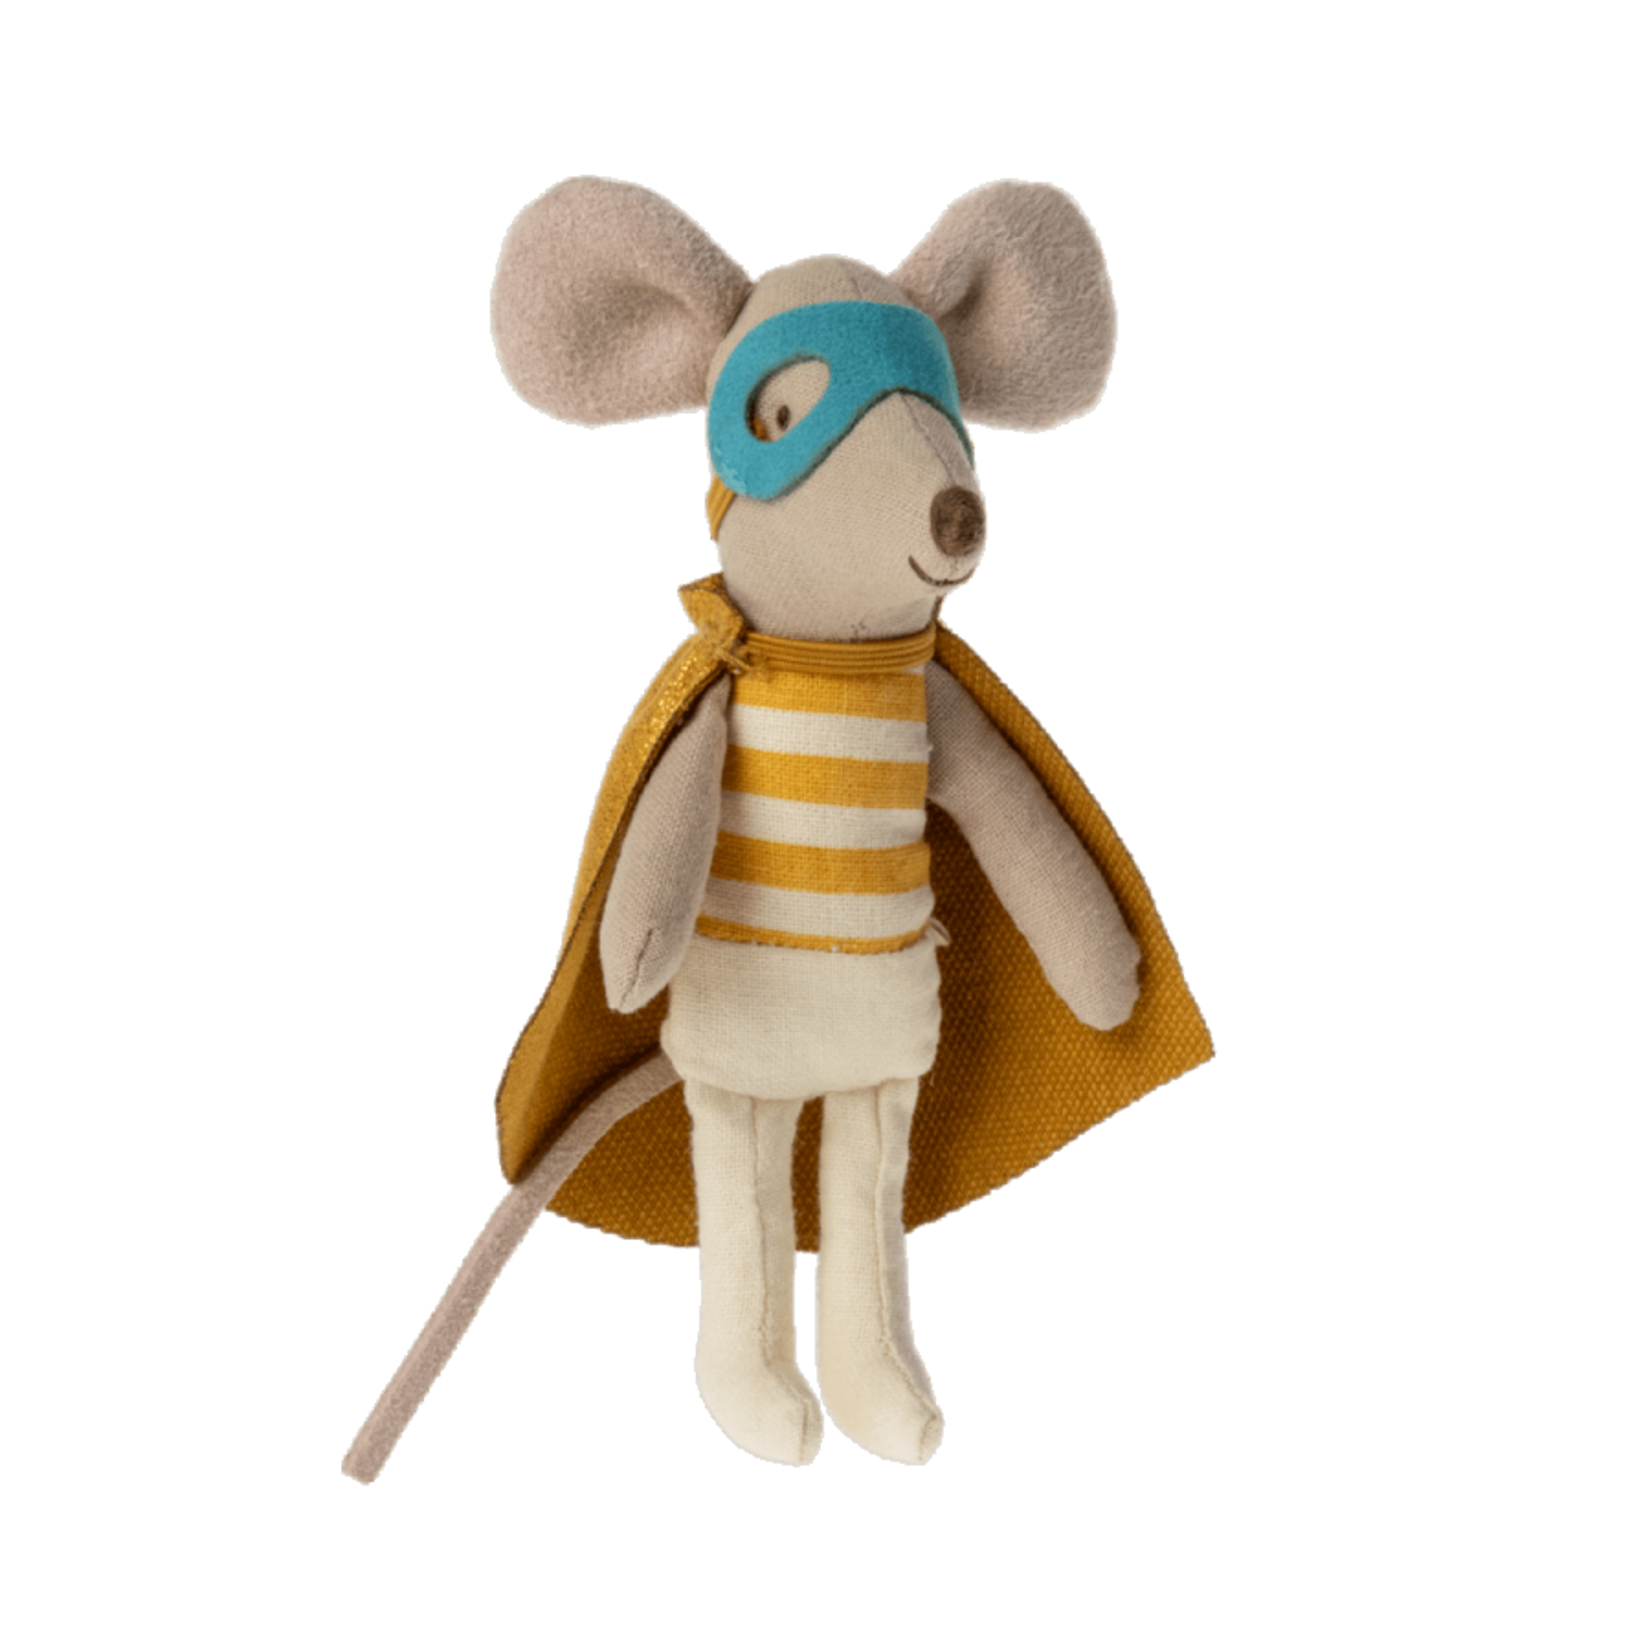 Maileg USA Super Hero Mouse, Little Brother in Matchbox